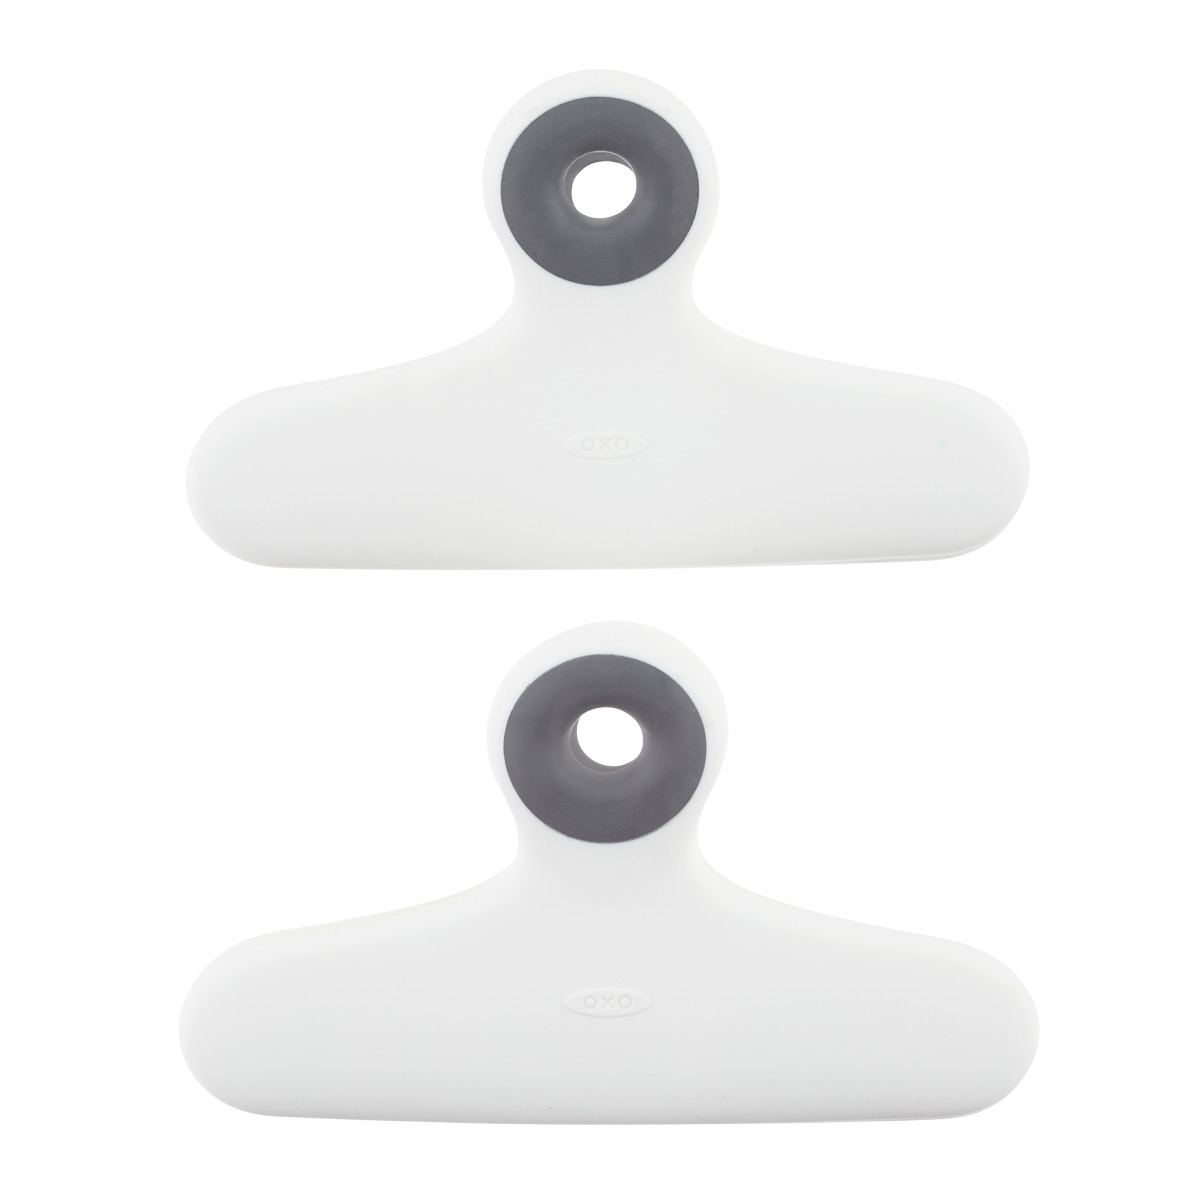 OXO Good Grips Magnetic All Purpose Clips – Colors - Pack of 4